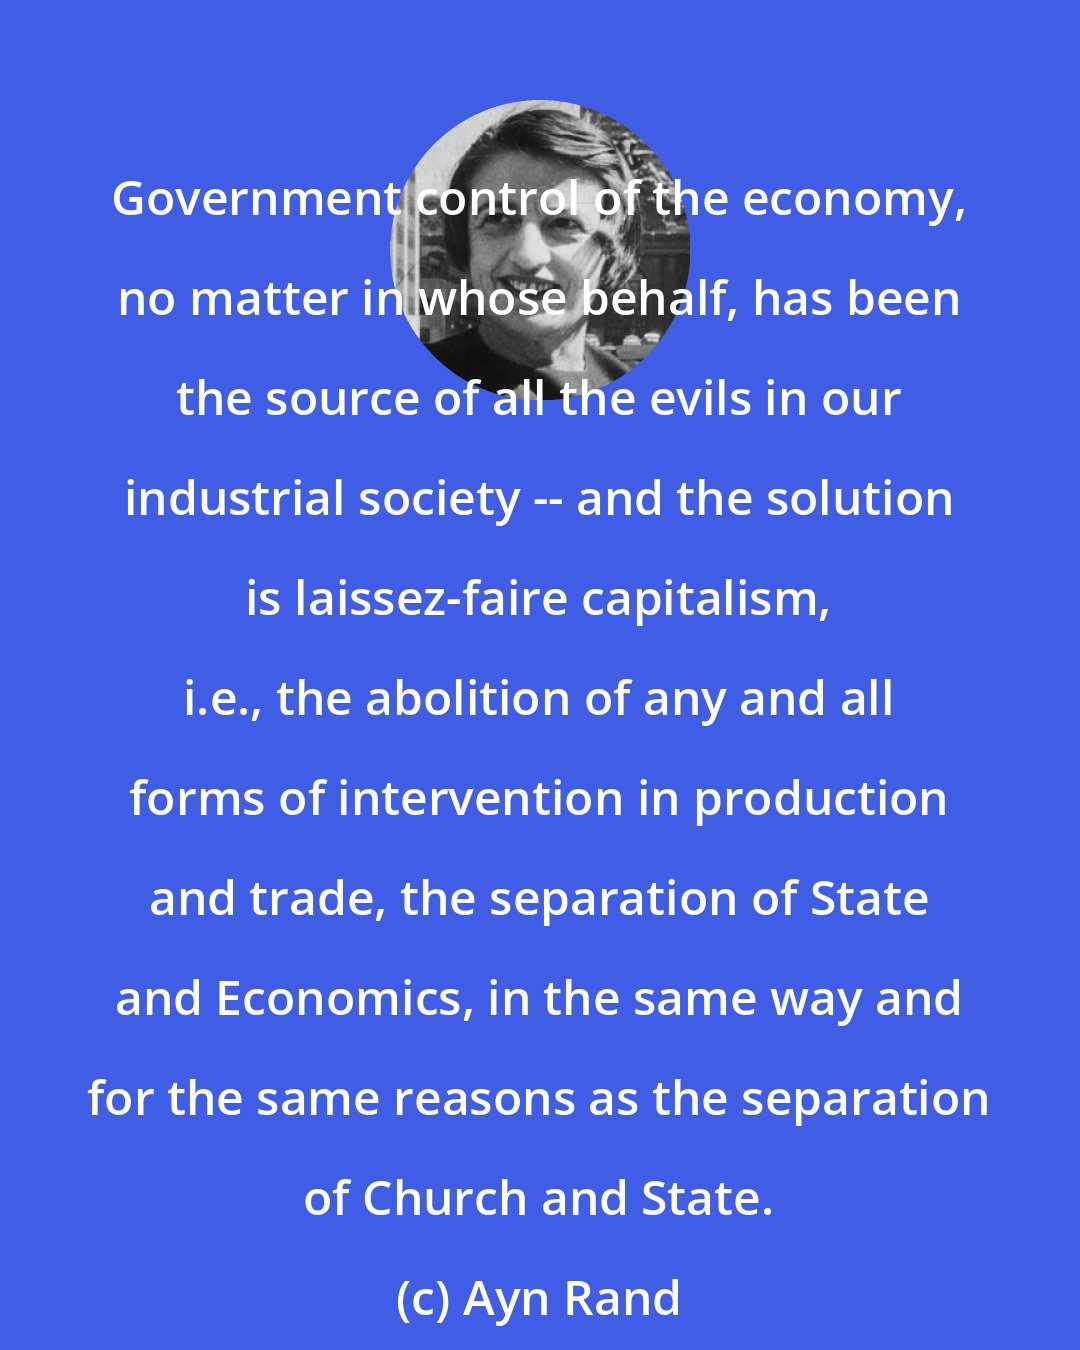 Ayn Rand: Government control of the economy, no matter in whose behalf, has been the source of all the evils in our industrial society -- and the solution is laissez-faire capitalism, i.e., the abolition of any and all forms of intervention in production and trade, the separation of State and Economics, in the same way and for the same reasons as the separation of Church and State.